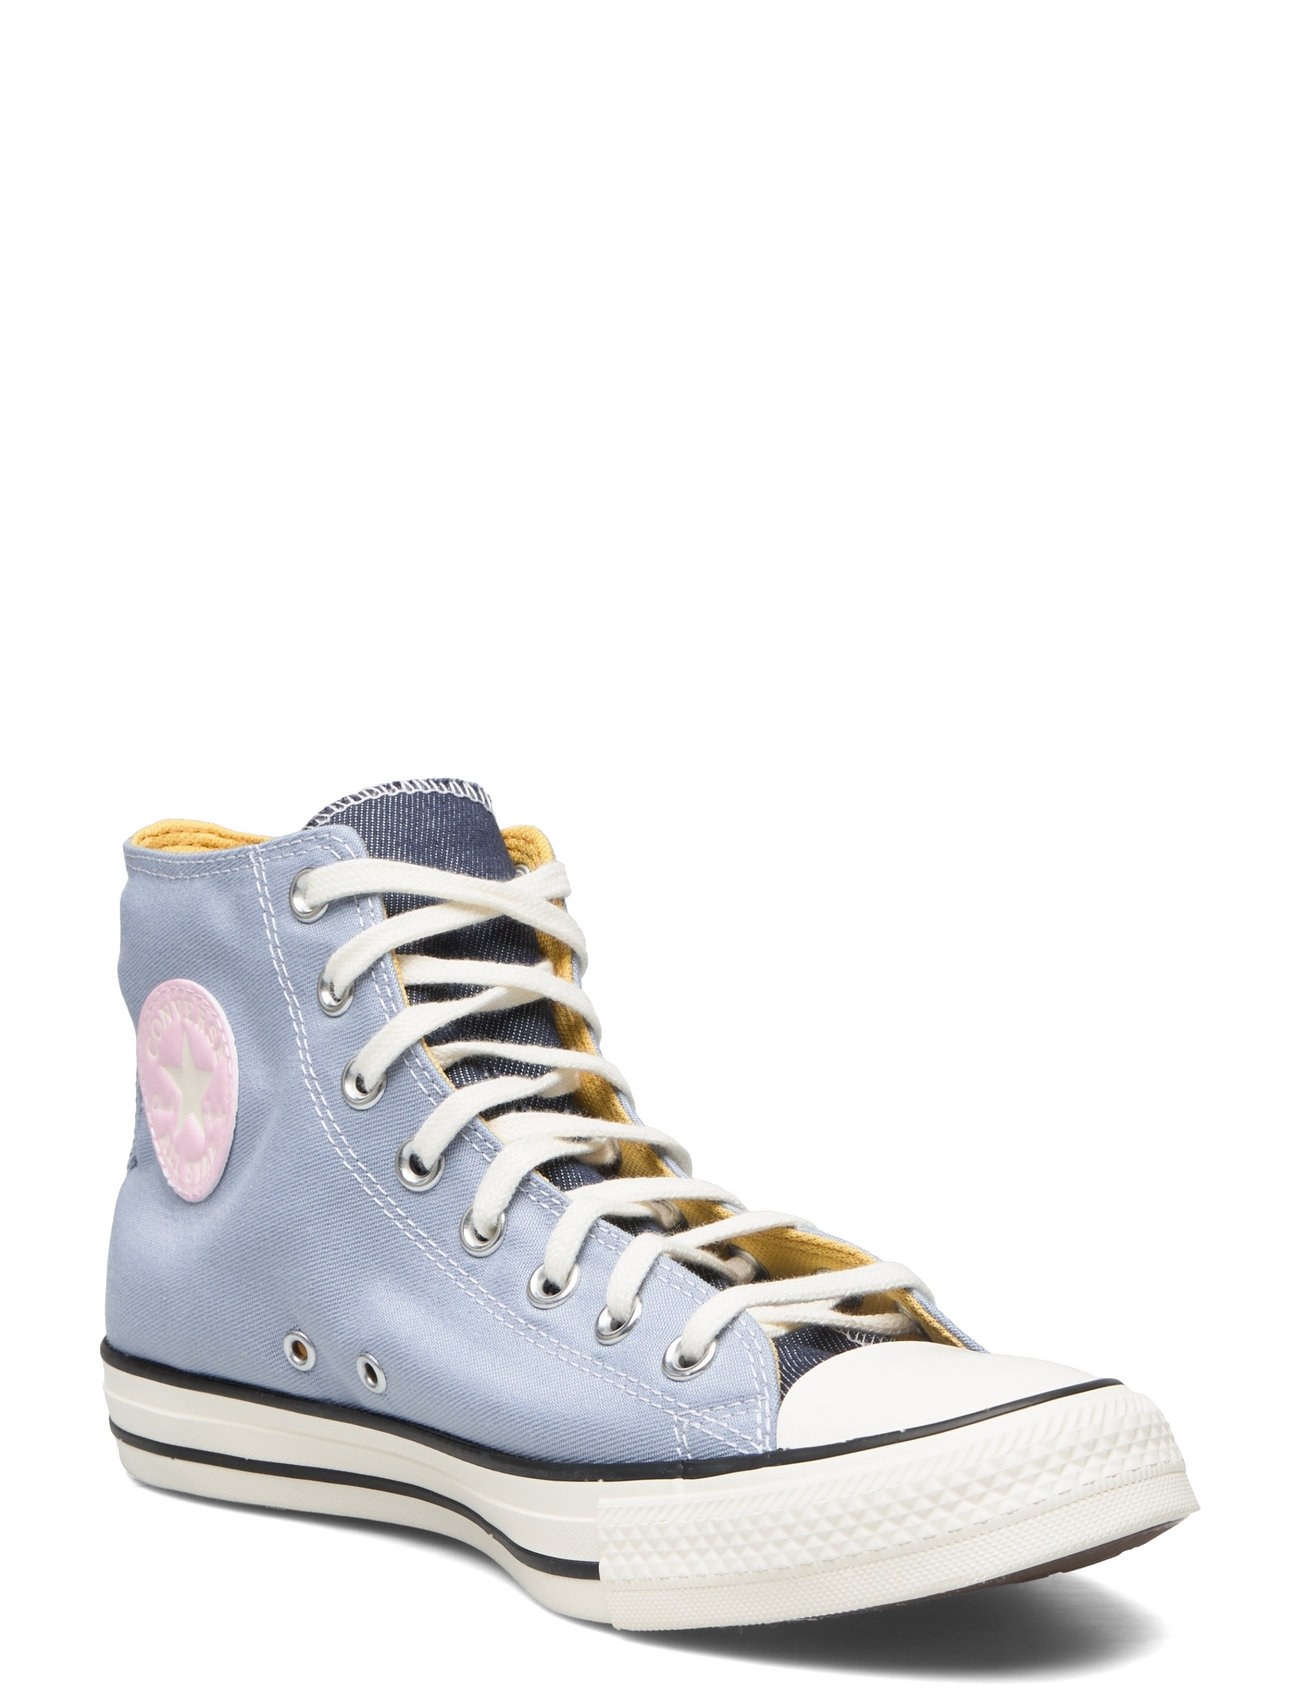 Converse Chuck Taylor All Star - High top sneakers 